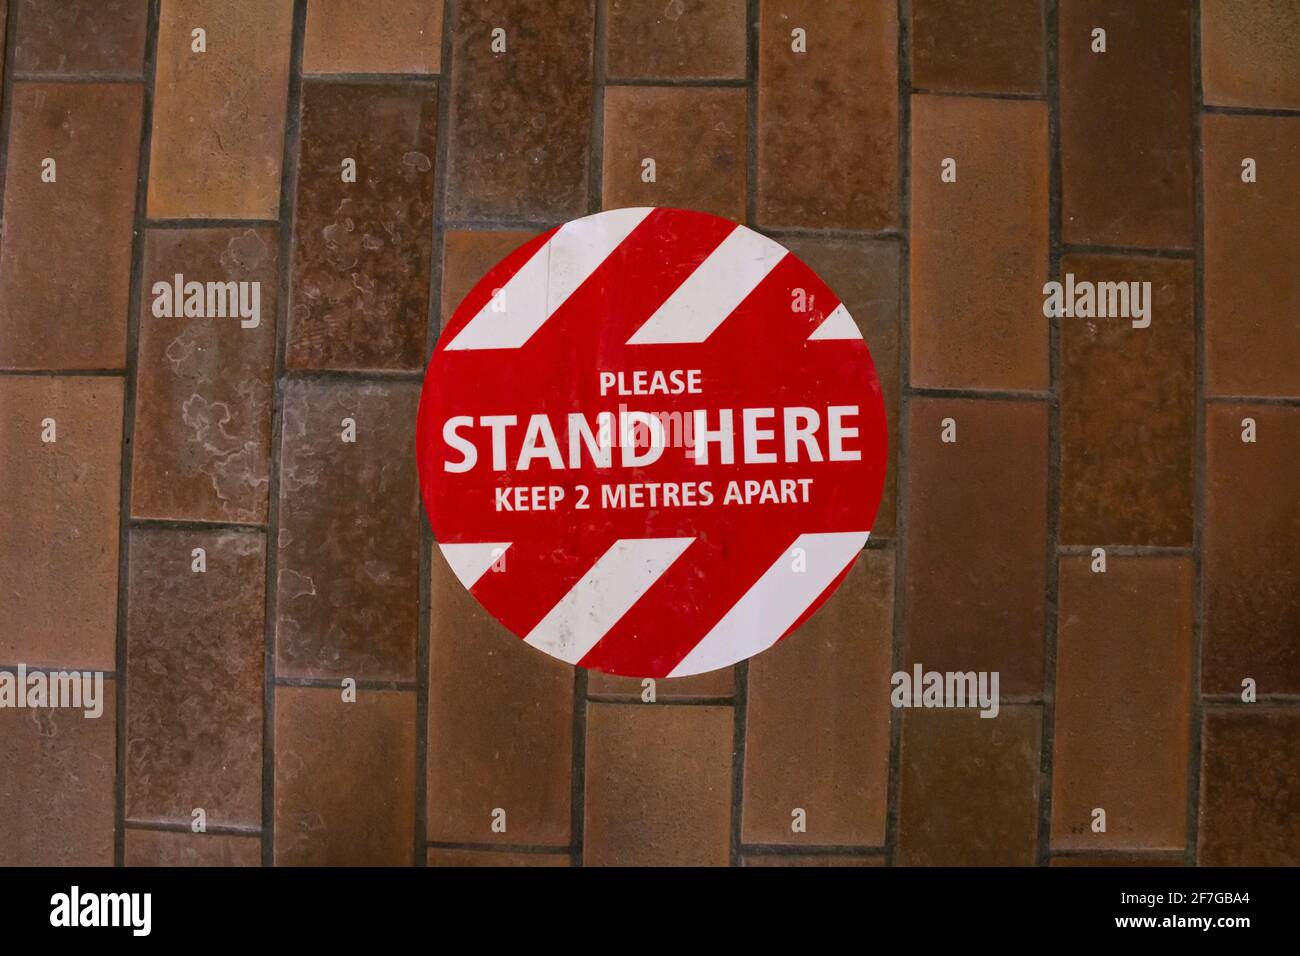 London, Ontario, Canada - February 6 2021: A floor sign near Sherwood Forest Mall's library asks patrons to stand six feet apart from others in line. Stock Photo